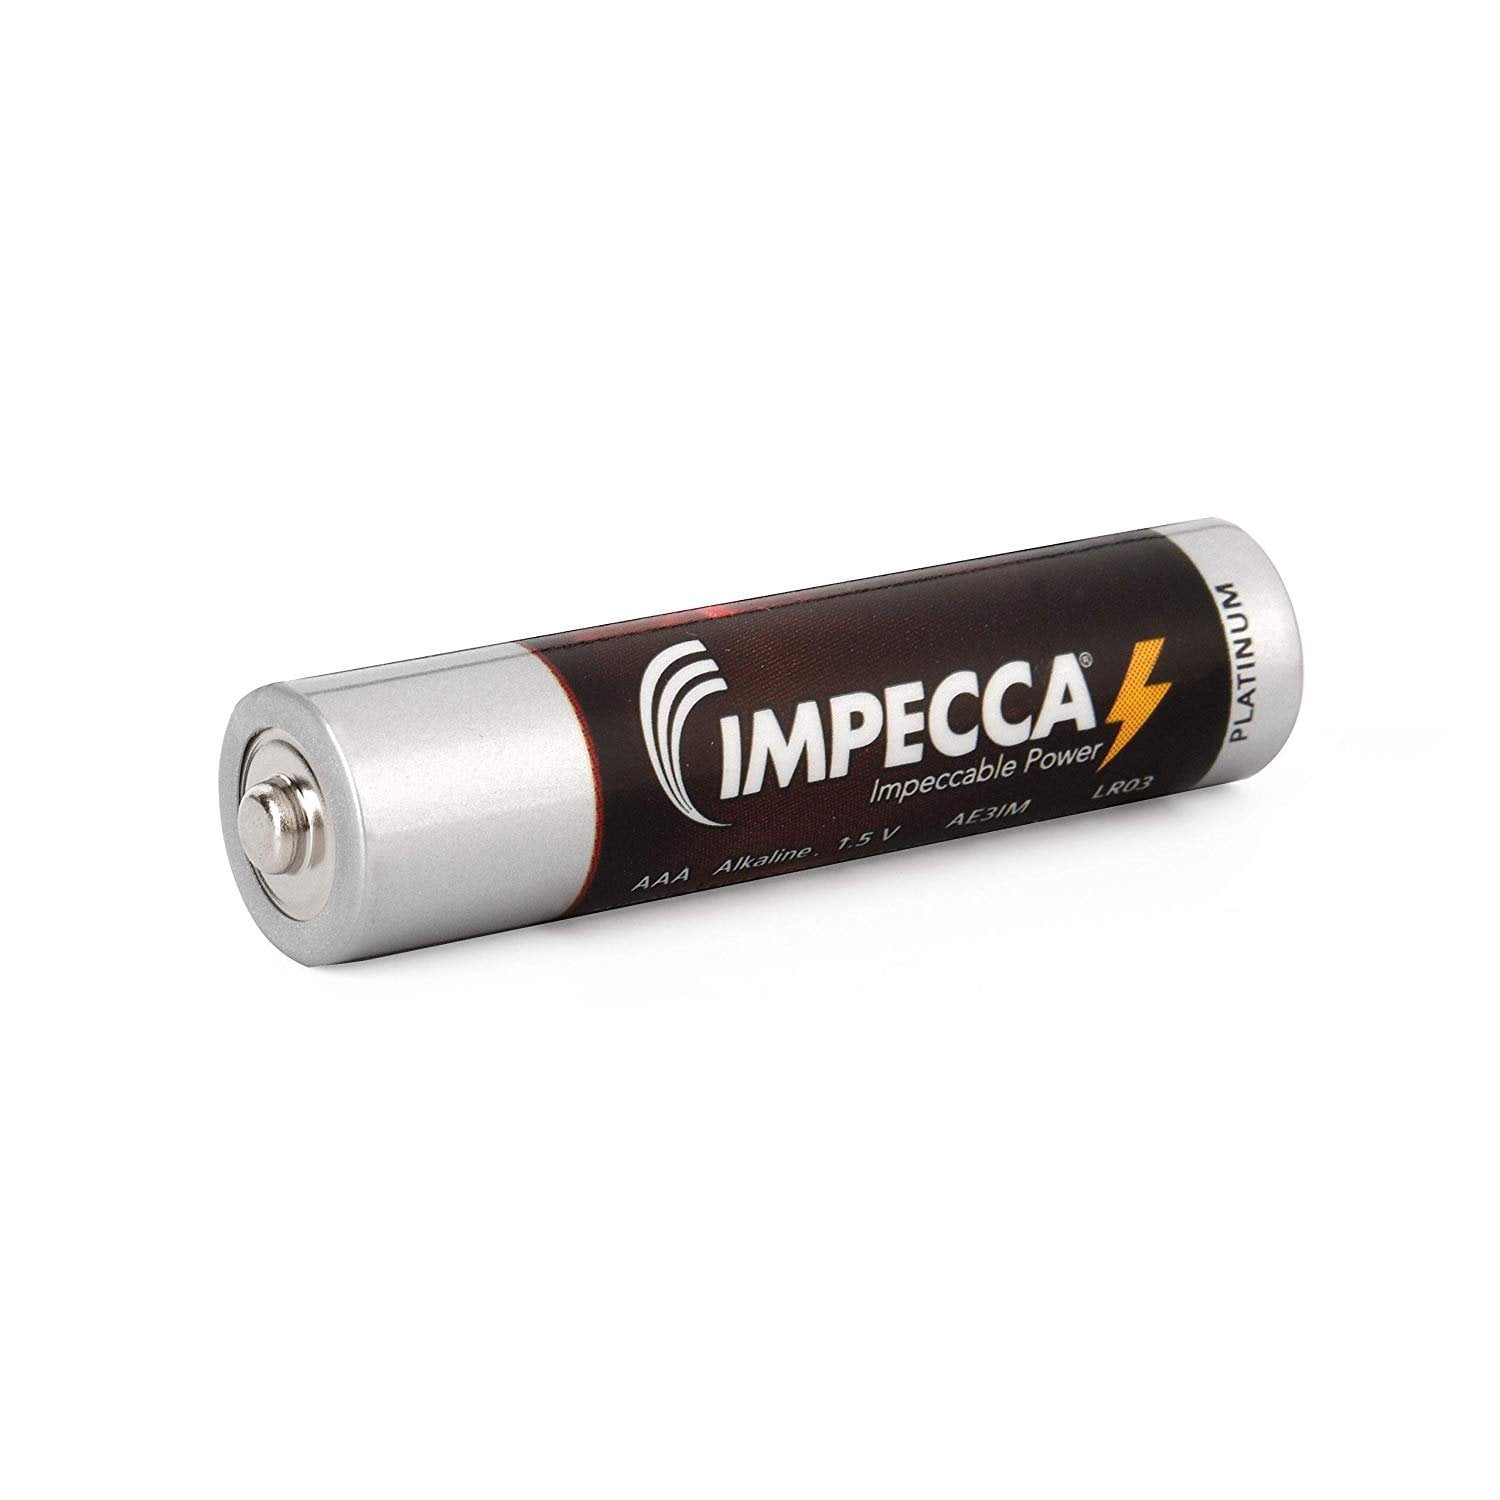 4 Pack IMPECCA AAA Batteries High Performance Triple A Alkaline Battery 1.5 Volt LR3 Non Rechargeable for Everyday Clocks Remotes Games Controllers Toys & Electronics 